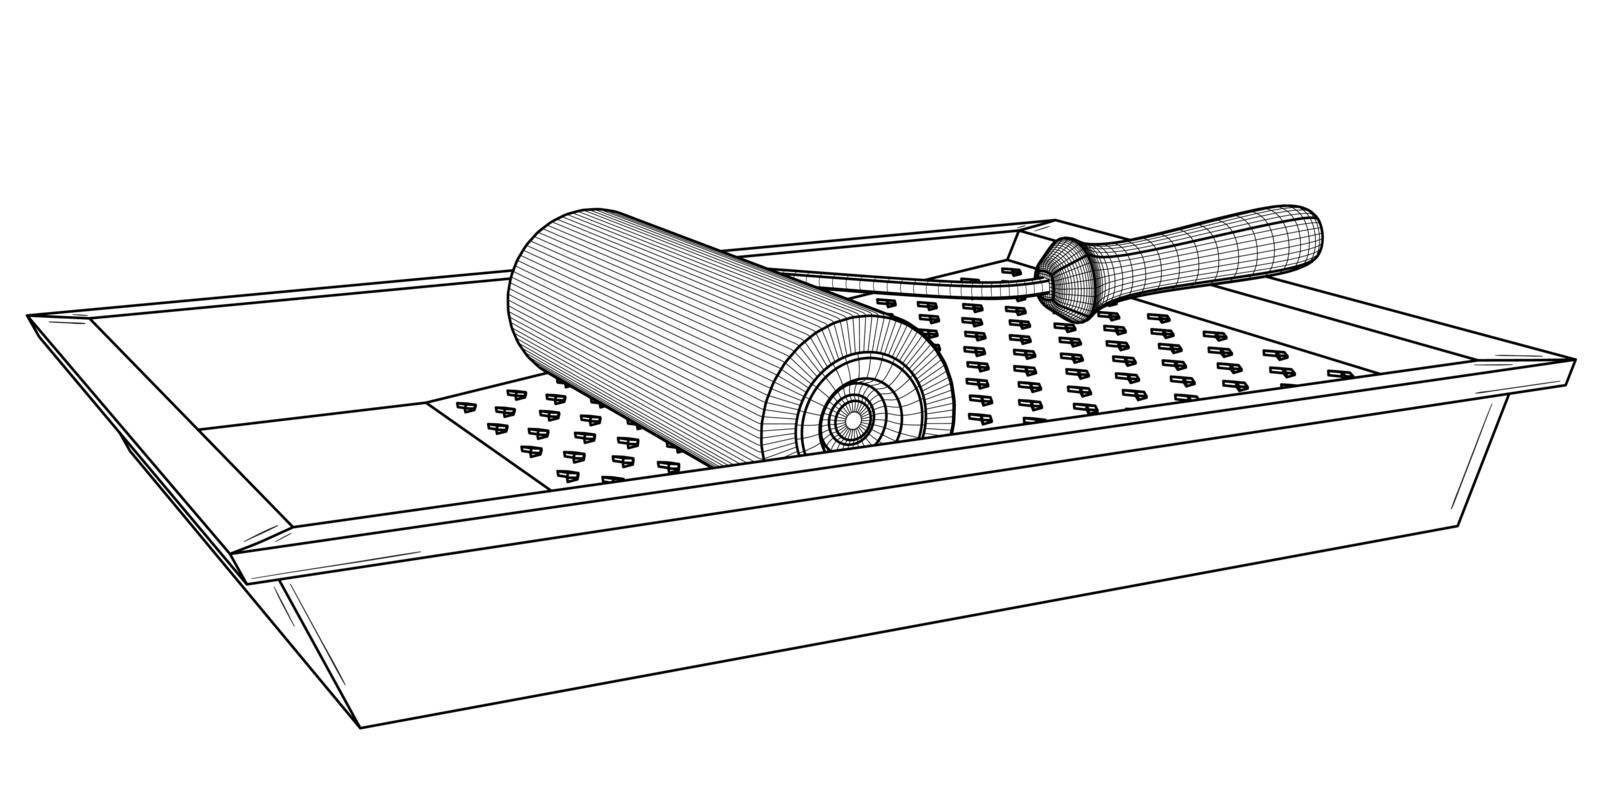 Painting roller with empty paint tray. Black outline illustration on white background. Sketch.